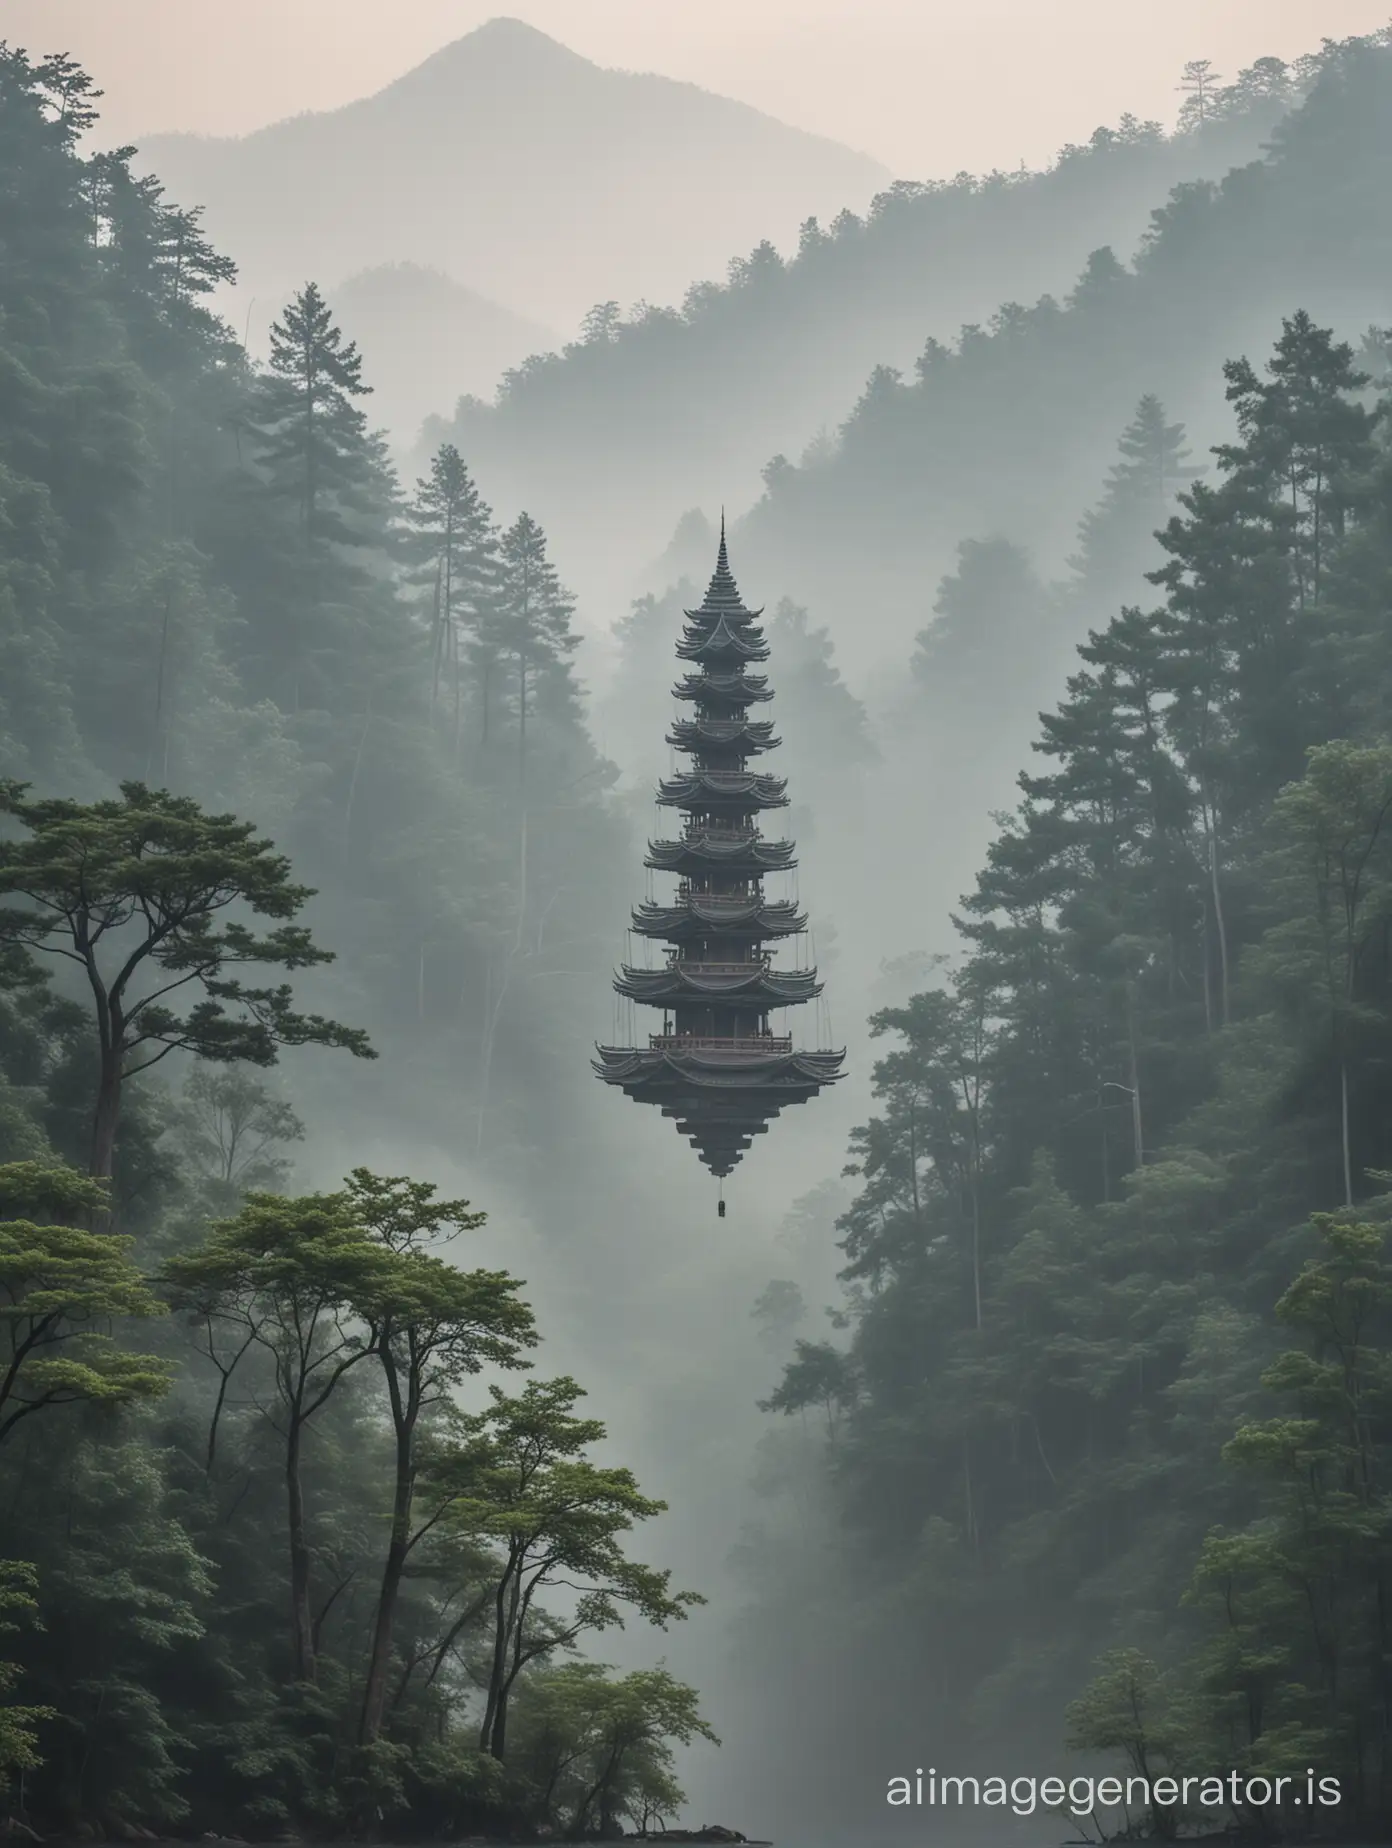 A pagoda in anty gravity floating above the forest in the sky in a smoggy morning. All aroun mountains in the horizon.